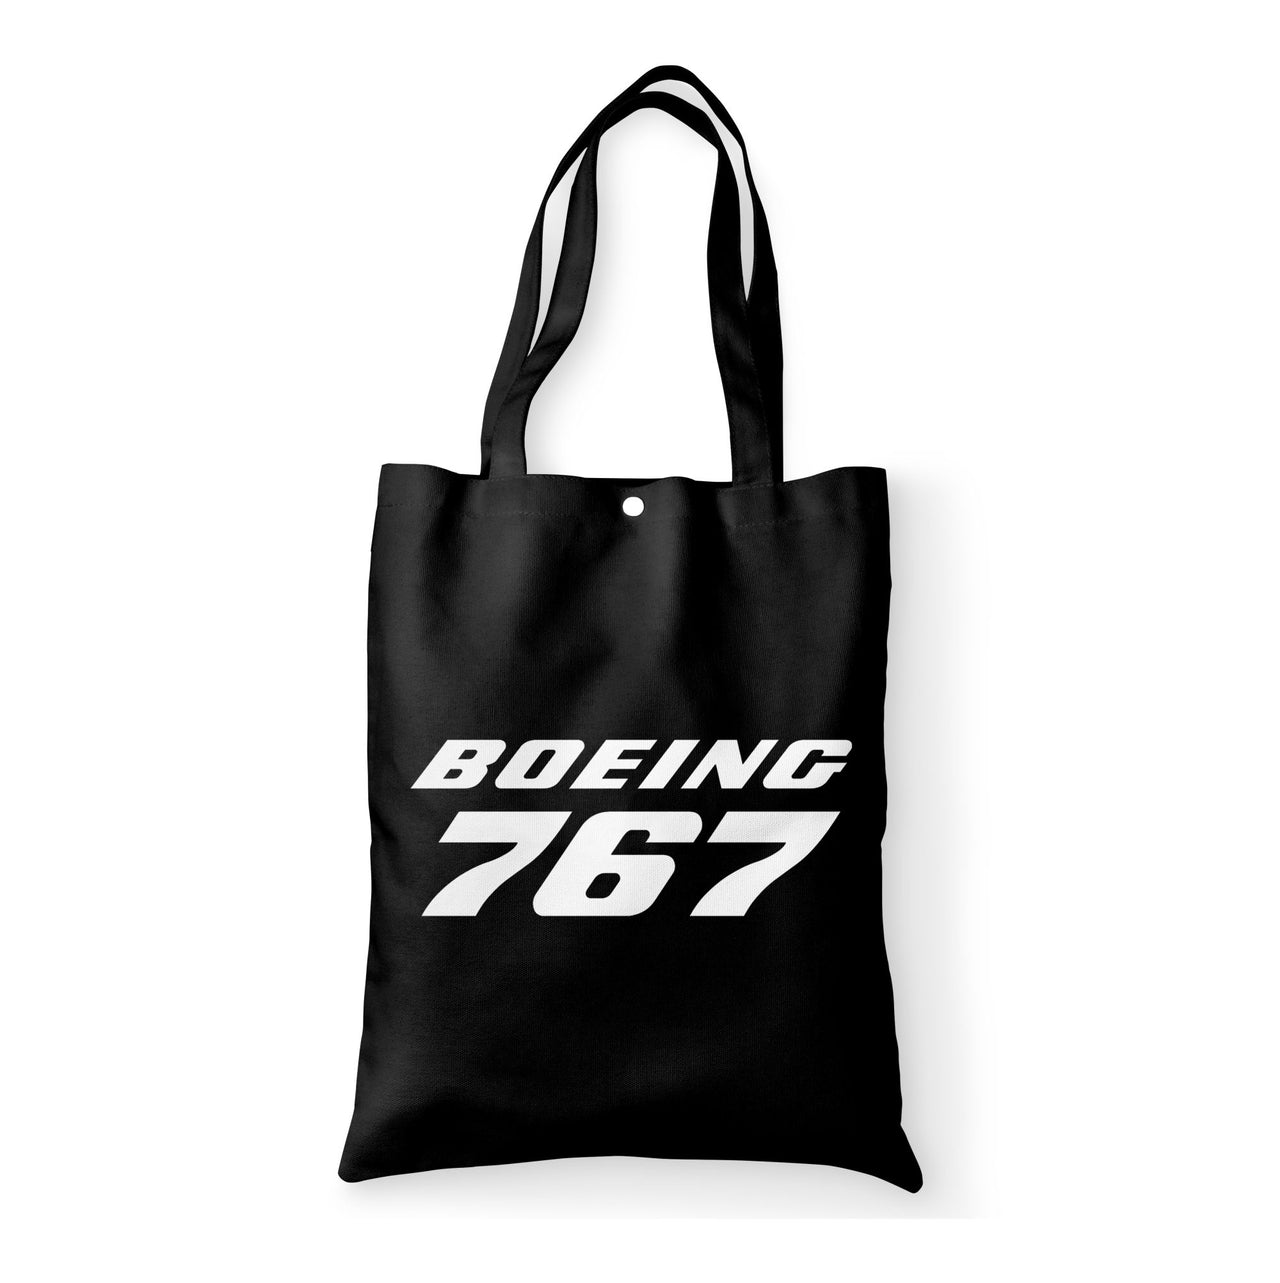 Boeing 767 & Text Designed Tote Bags